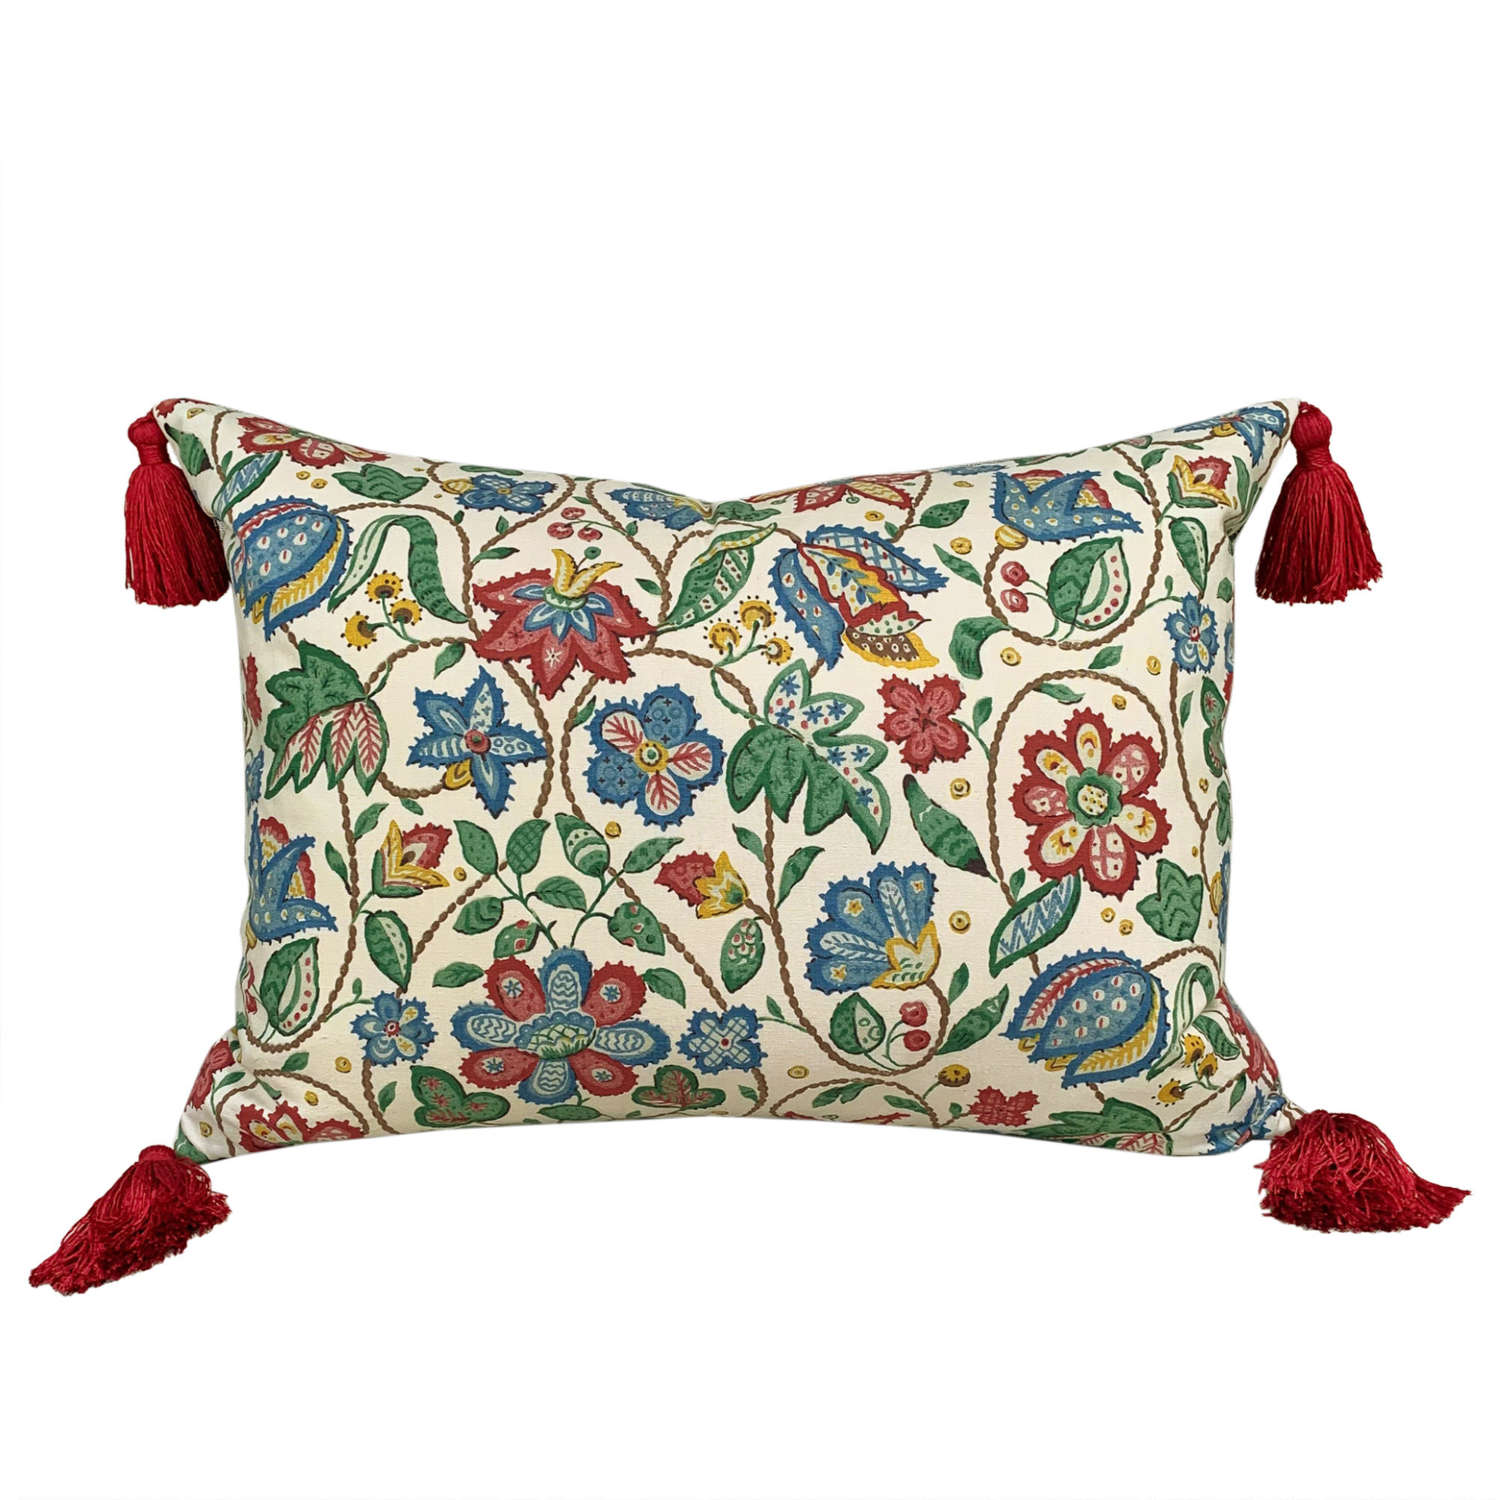 Vintage Floral Cushions With Tassels